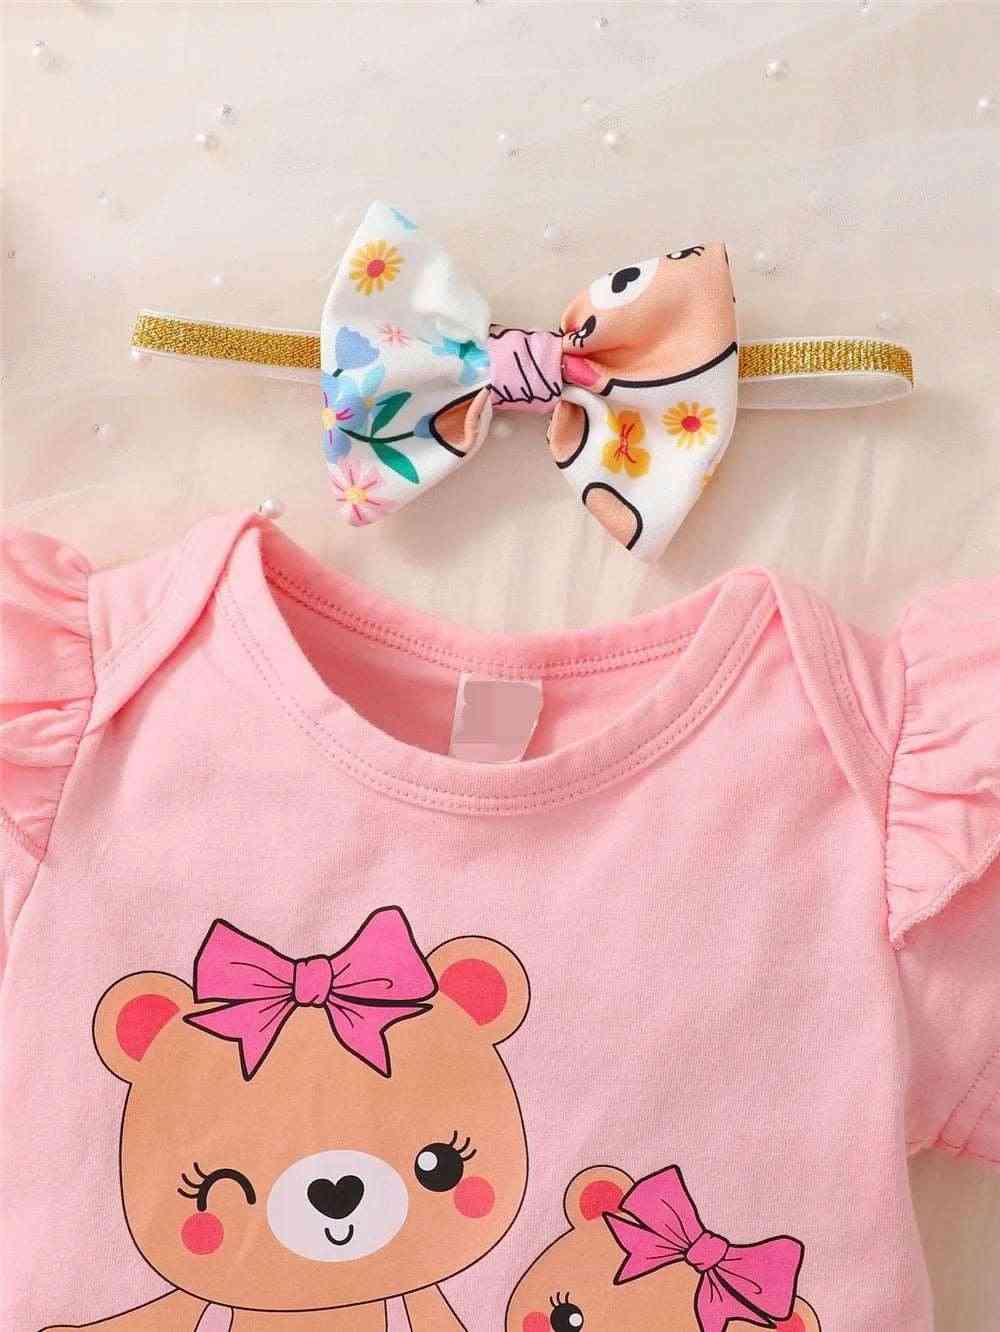 Cartoon Bear Cutie: 3-Piece Baby Outfit - For all baby